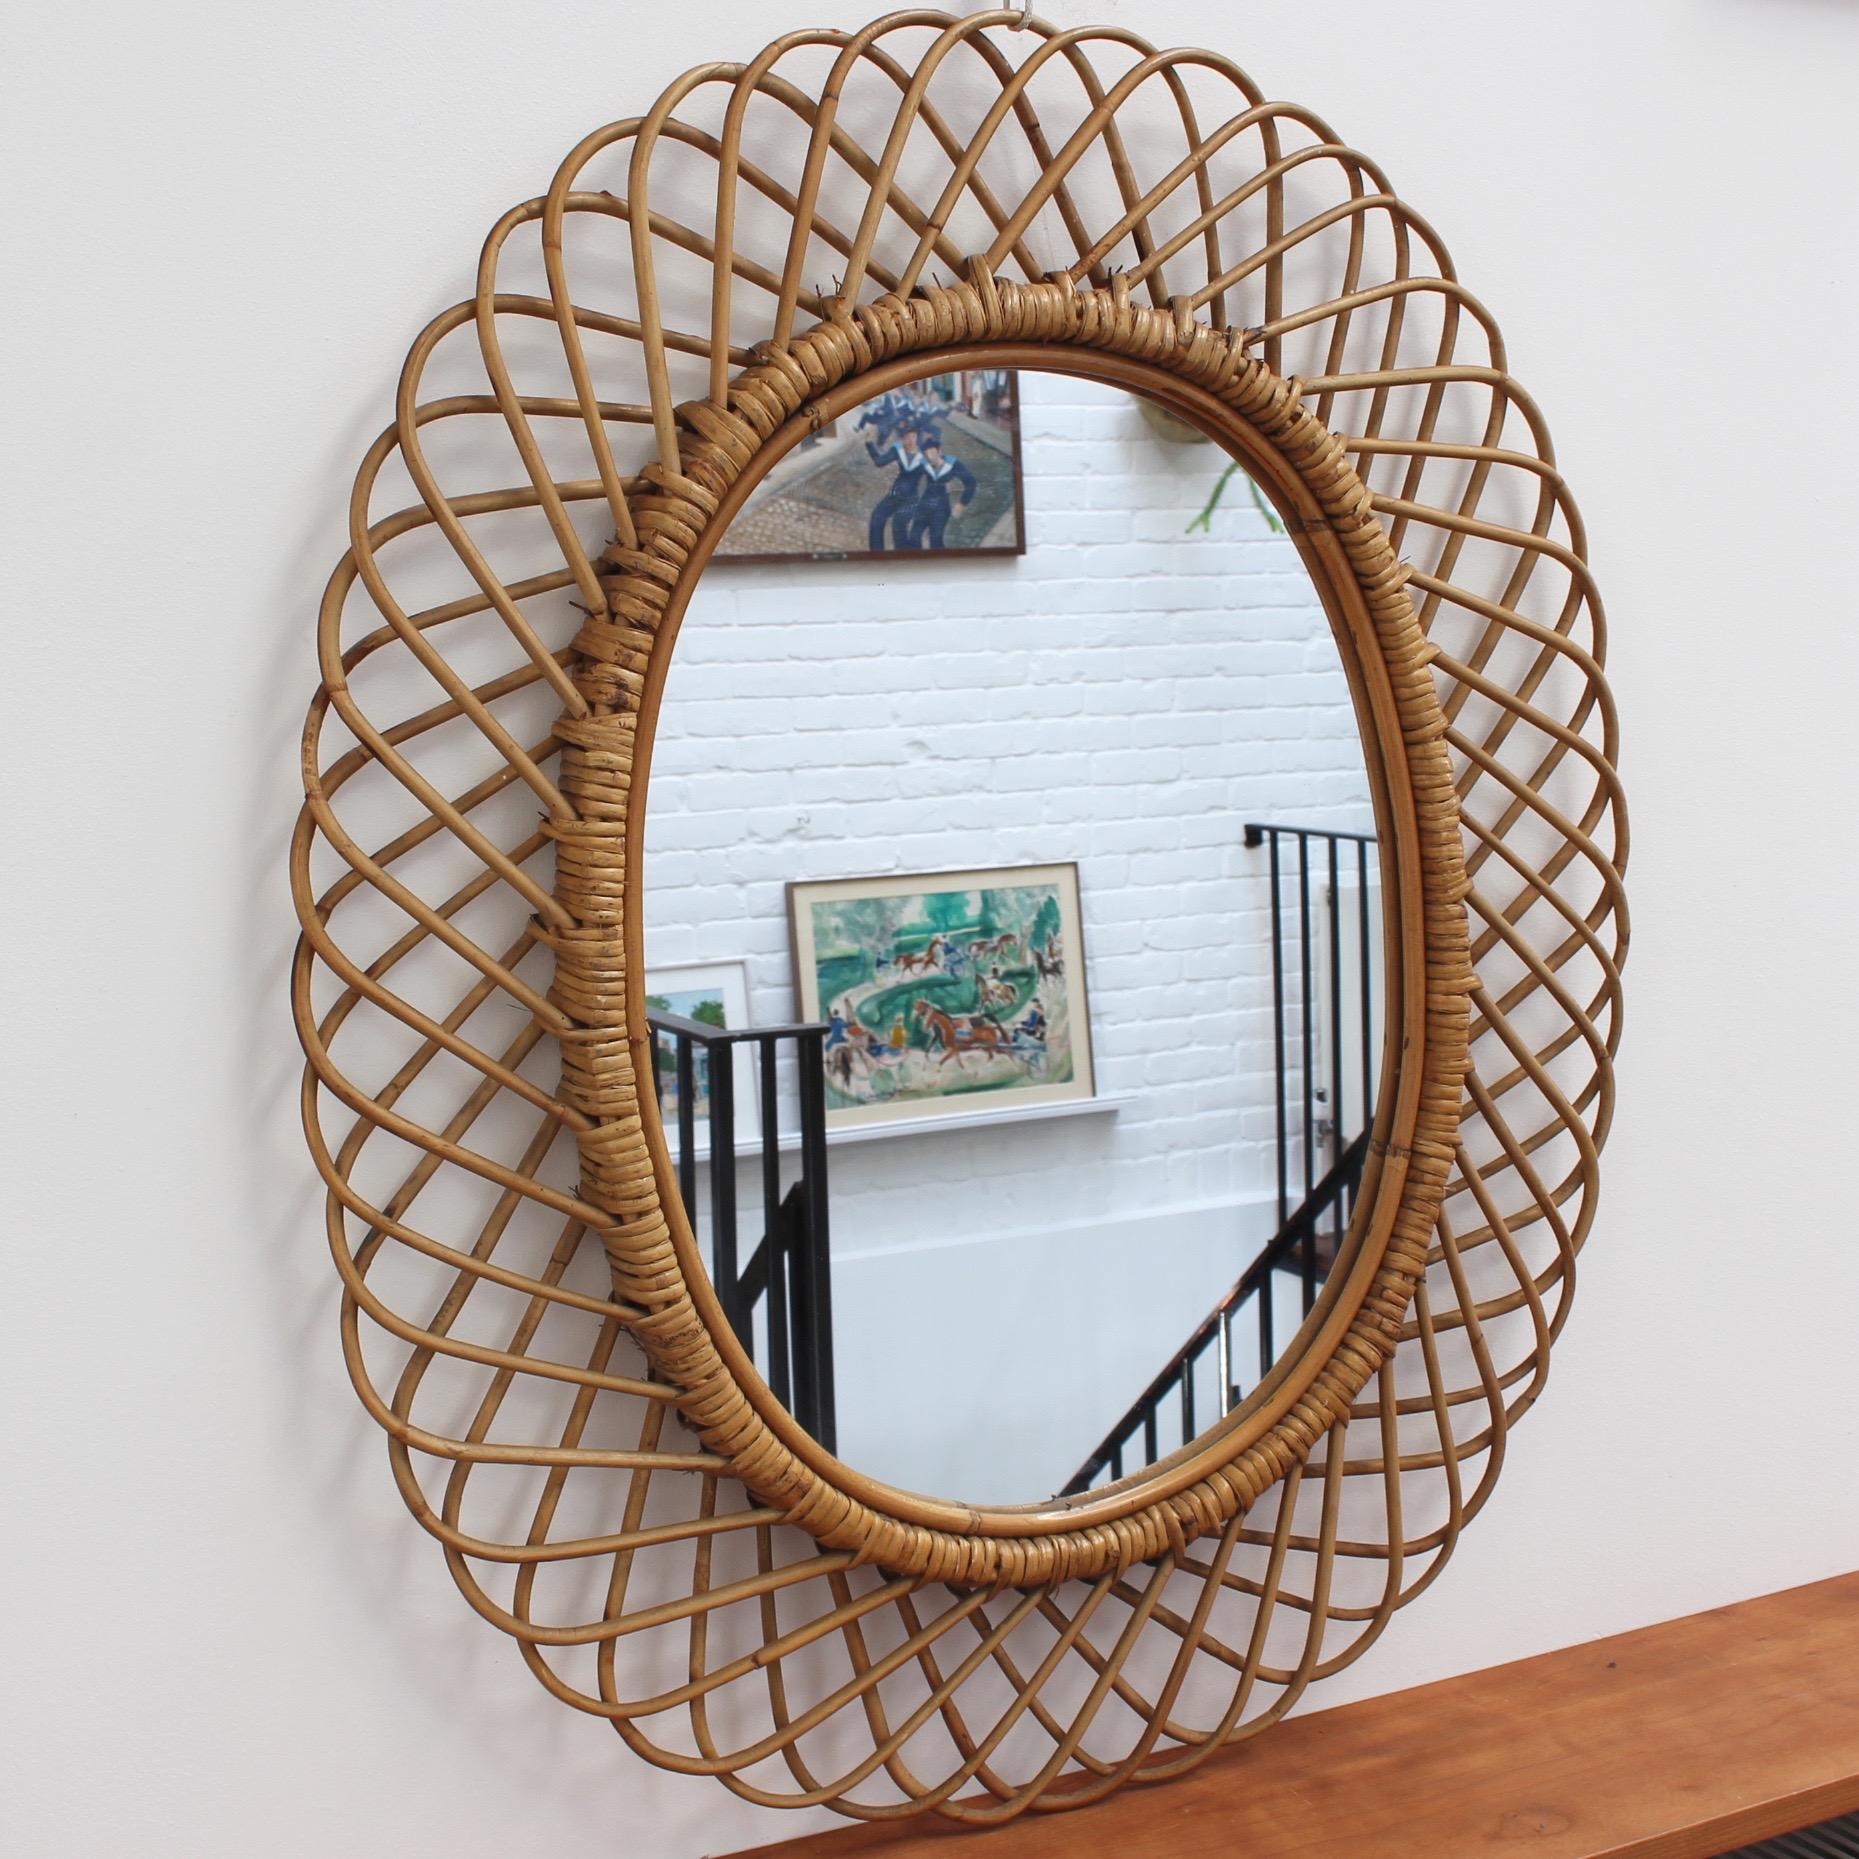 Italian rattan wall mirror (circa 1960s) in the style of Franco Albini. This mirror has a complex weave of rattan in a series of horseshoe-shaped projections on the frame edge. There is a graceful, aged patina on the mirror frame and the rattan